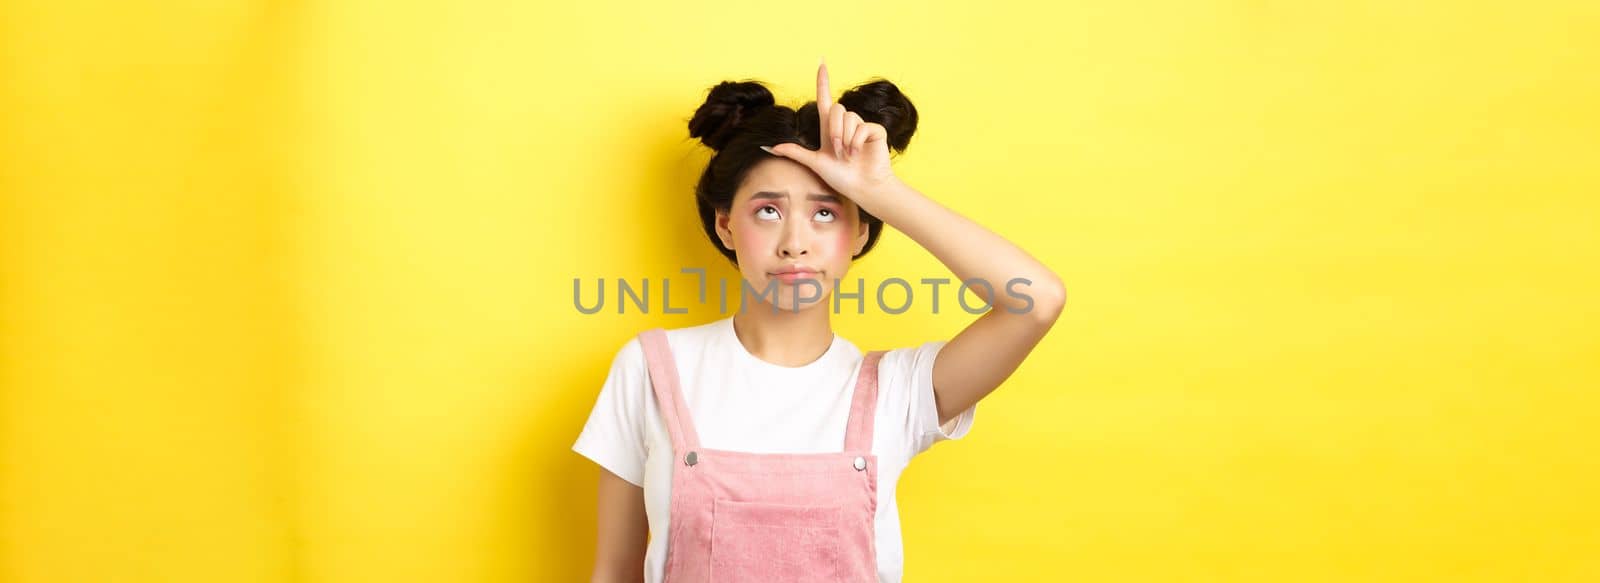 Sad girl showing loser sign on forehead and sulking upset, feeling disappointed in herself, standing on yellow background.